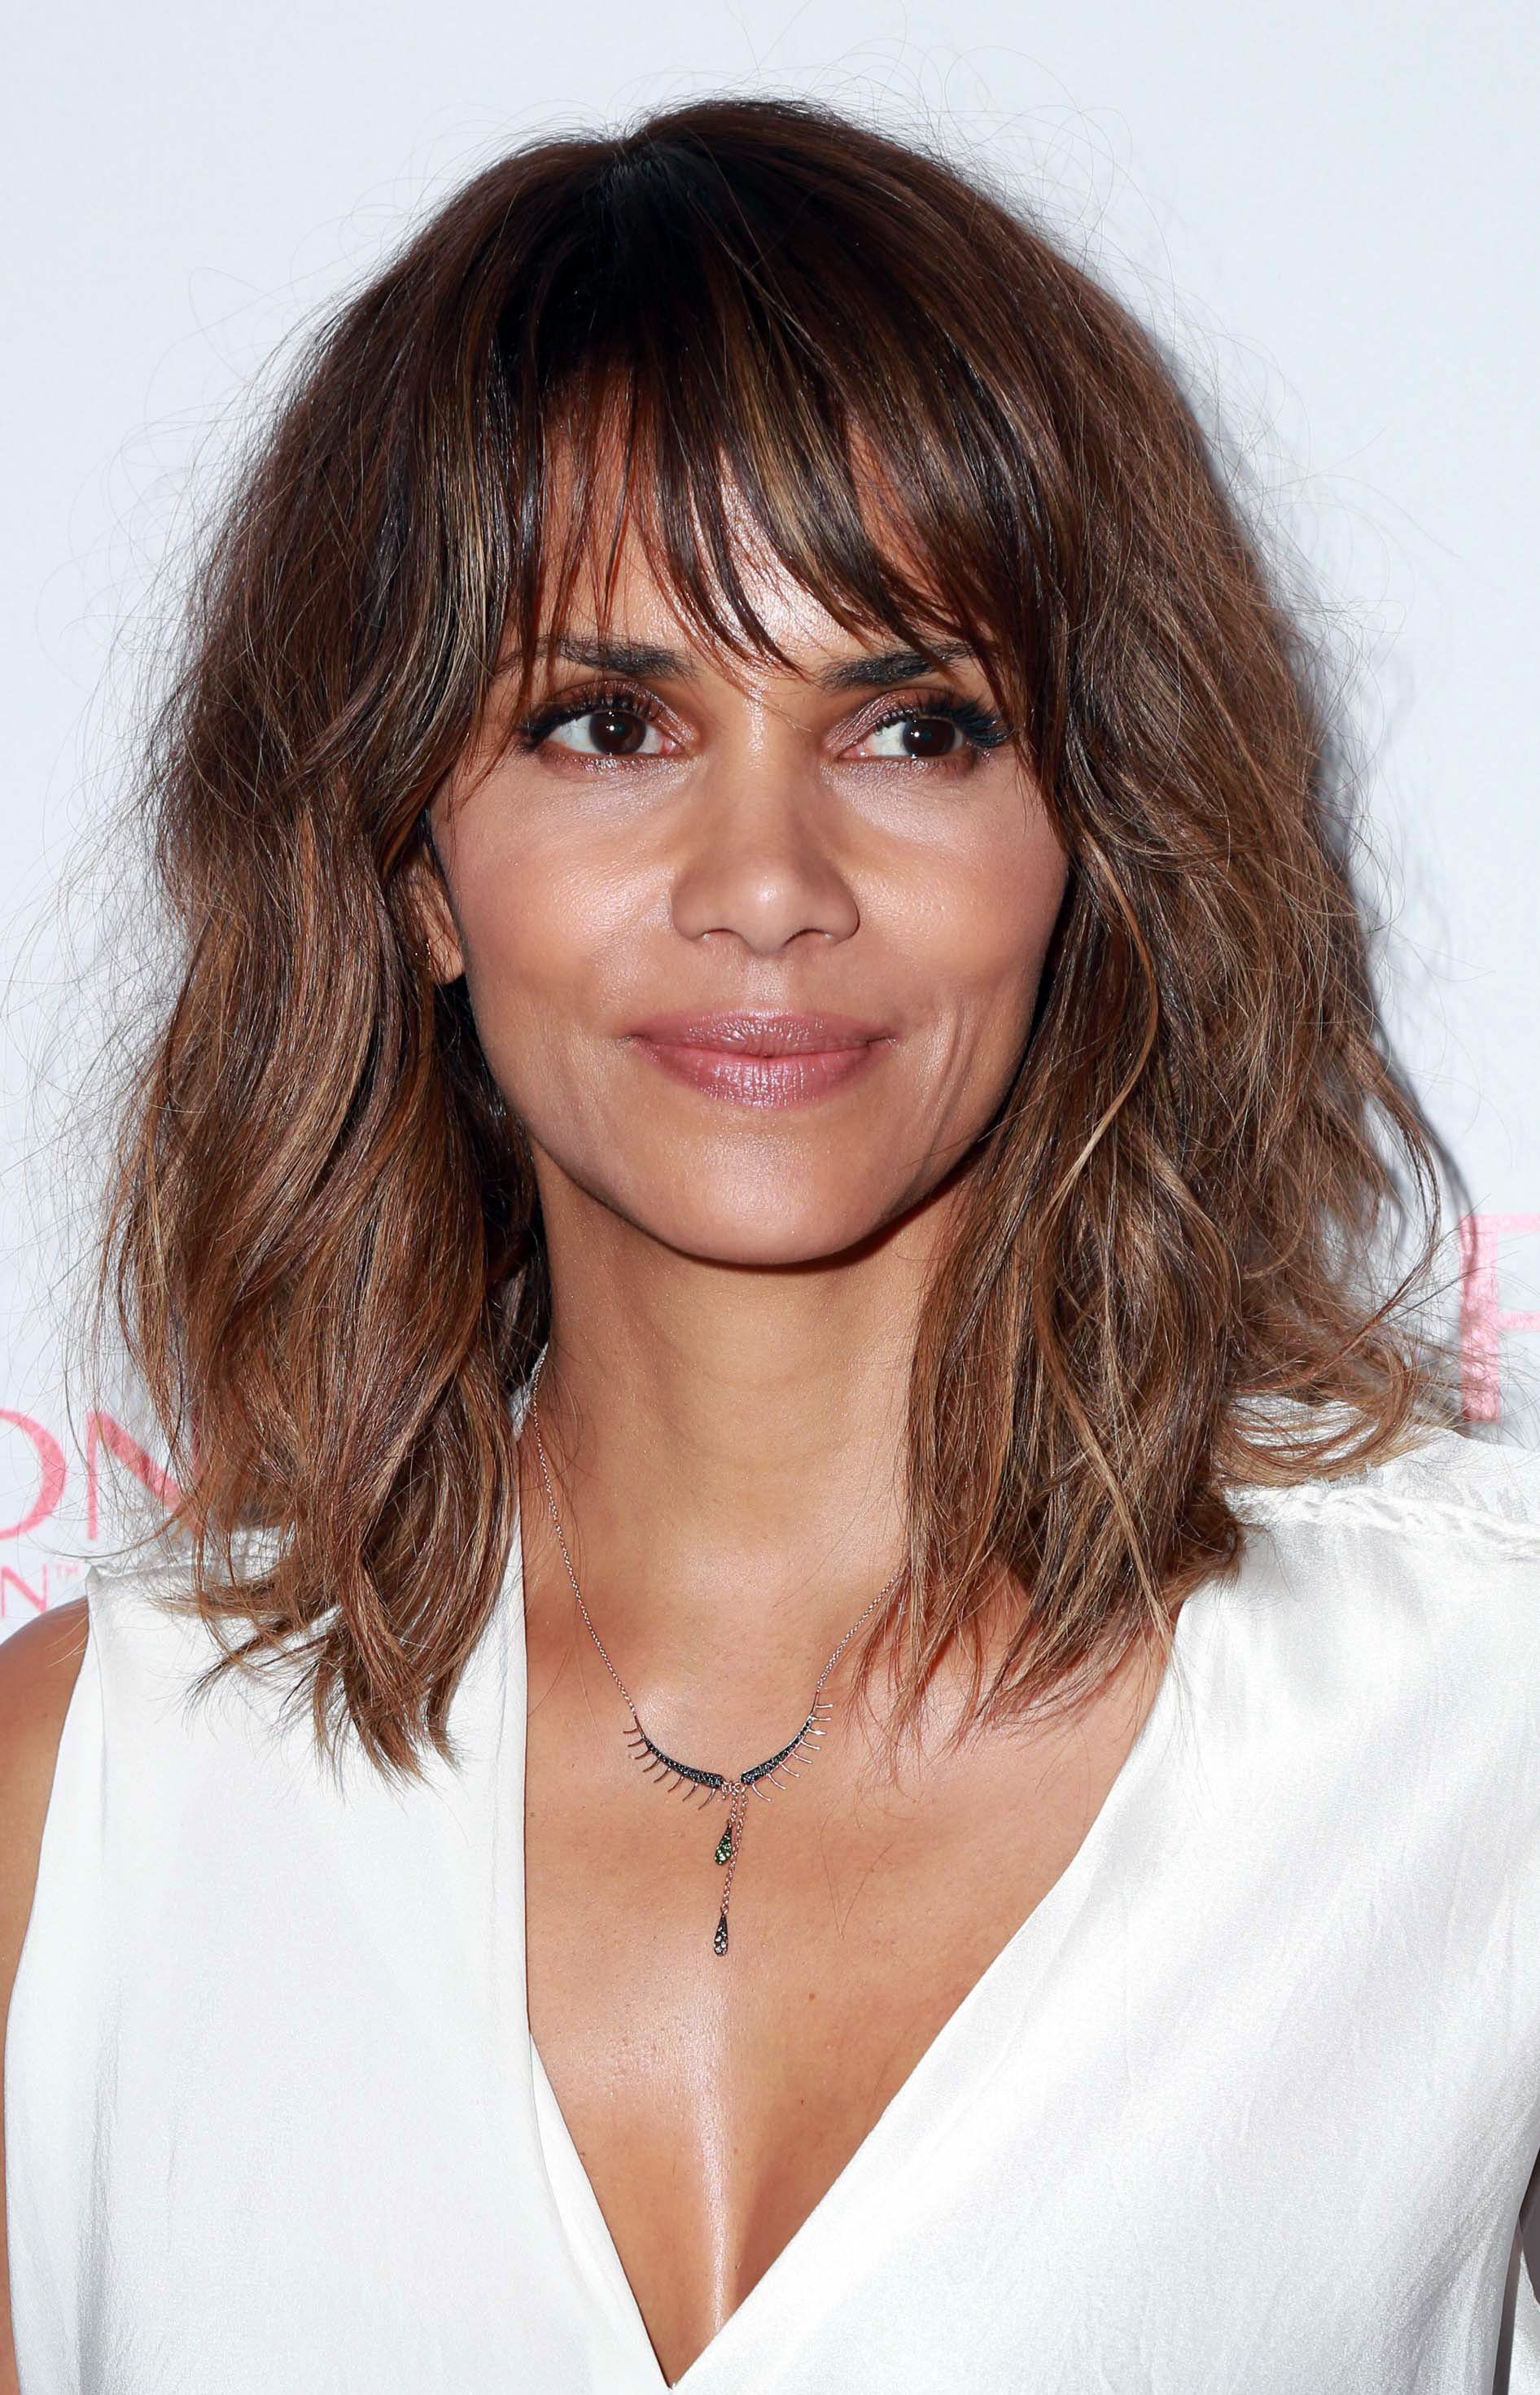 12 Best Hairstyles for Women Over 40 - Celeb Haircut Ideas Over 40